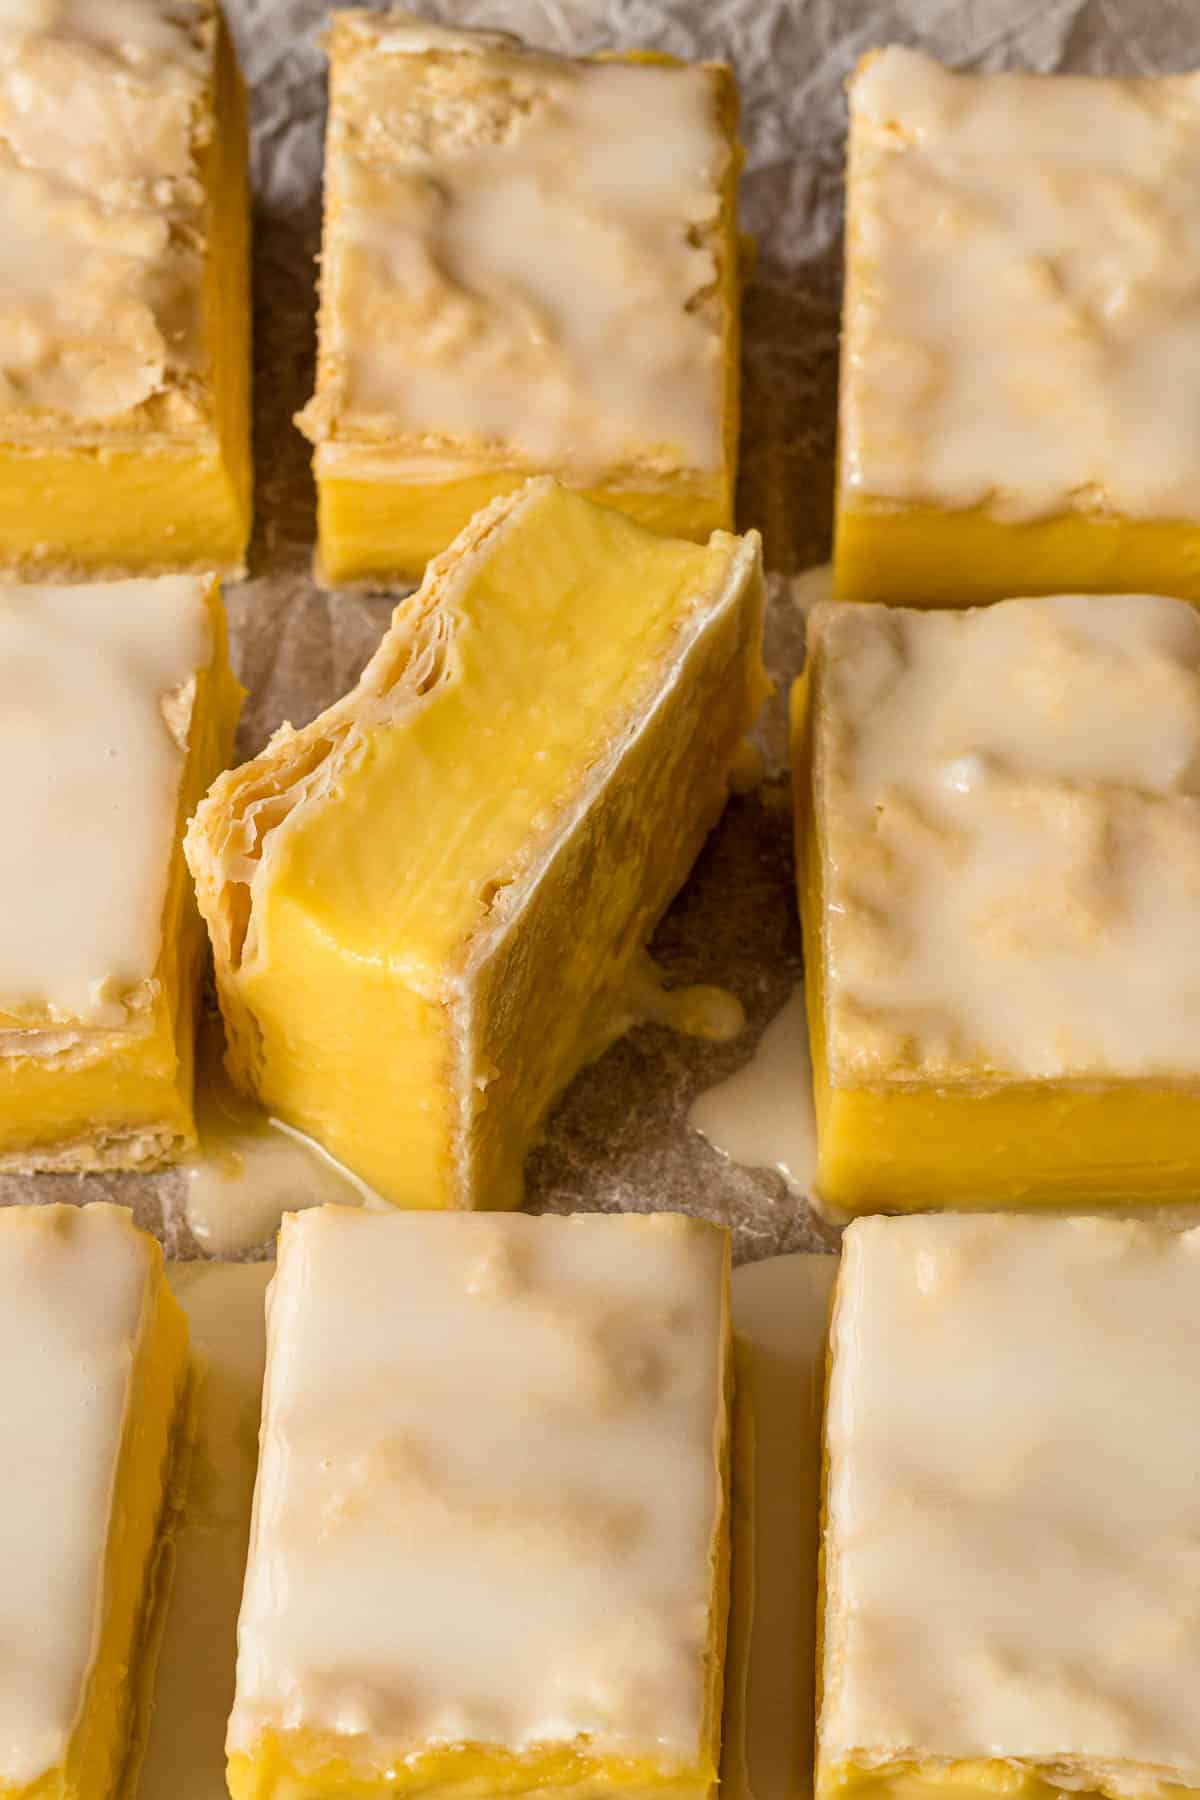 Vanilla slice on its side showing the slayers of pastry and custard.